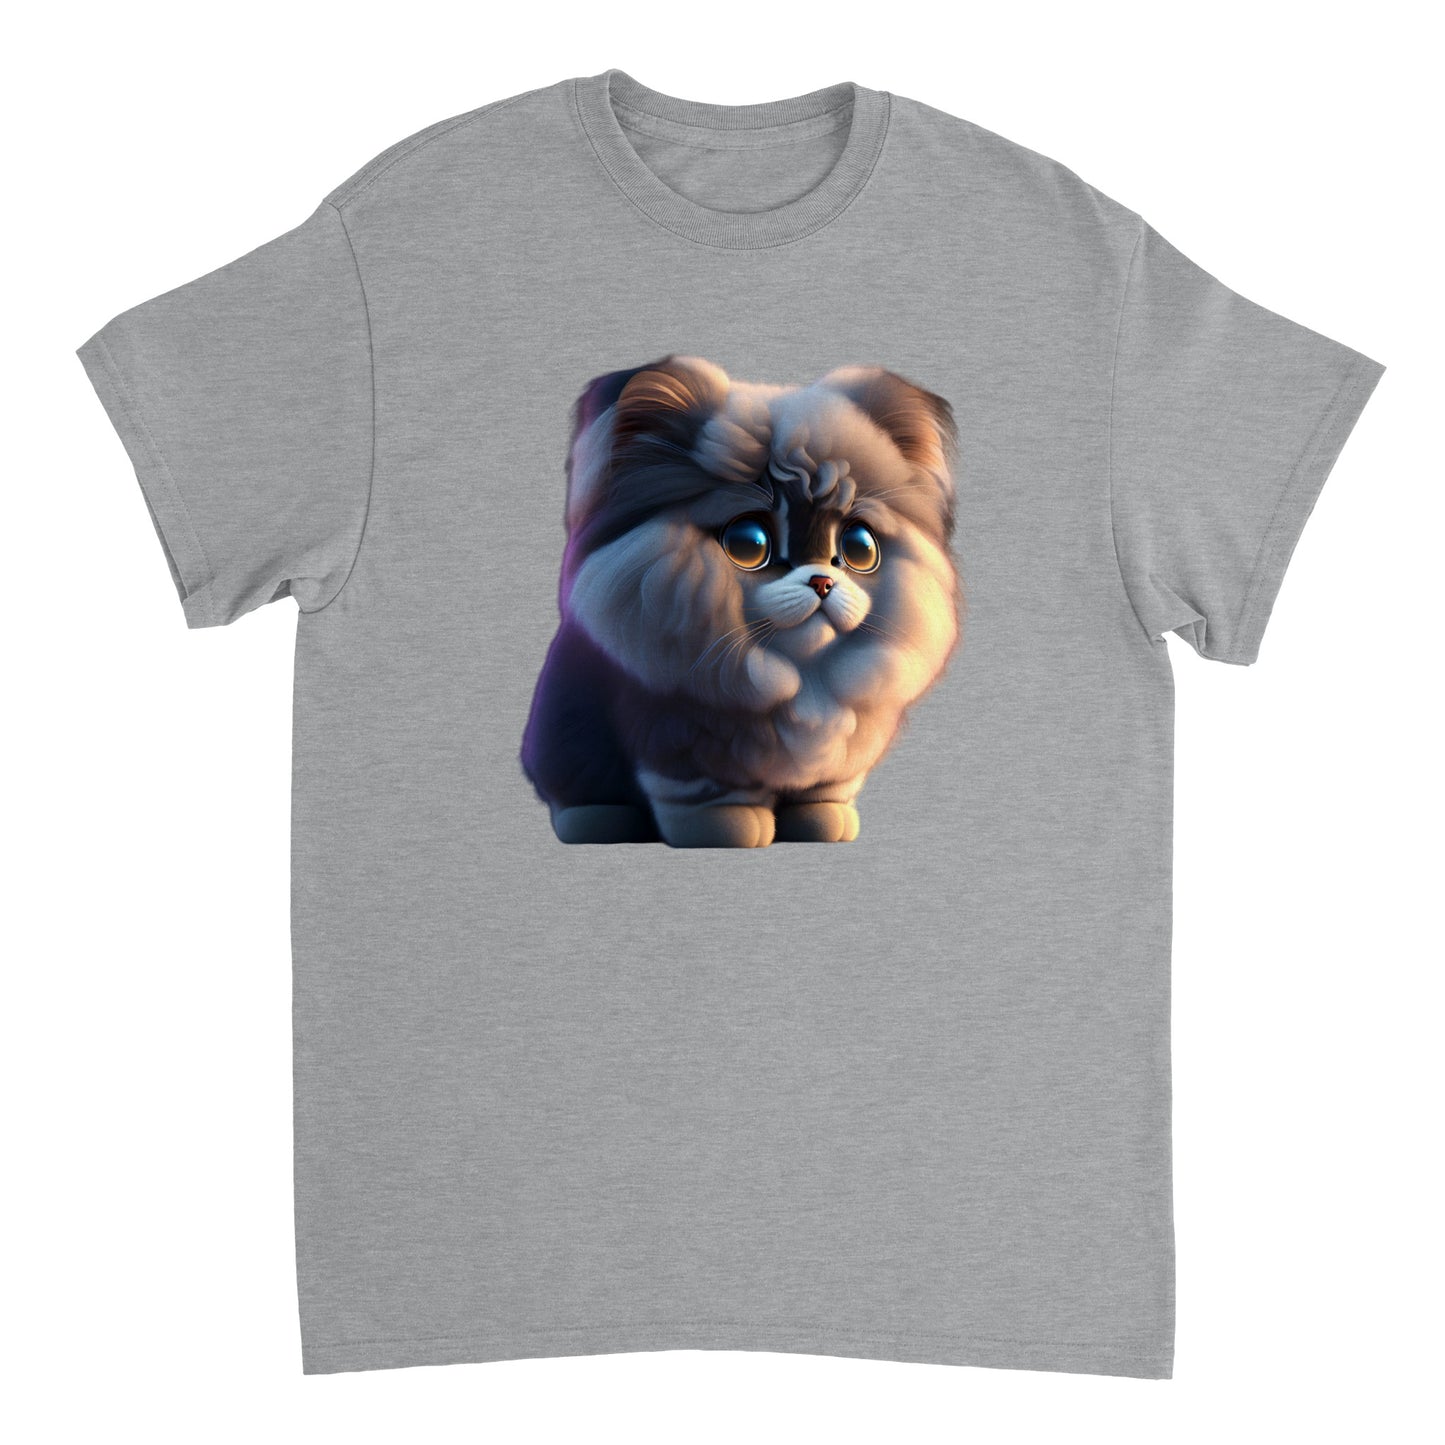 Adorable, Cool, Cute Cats and Kittens Toy - Heavyweight Unisex Crewneck T-shirt 8